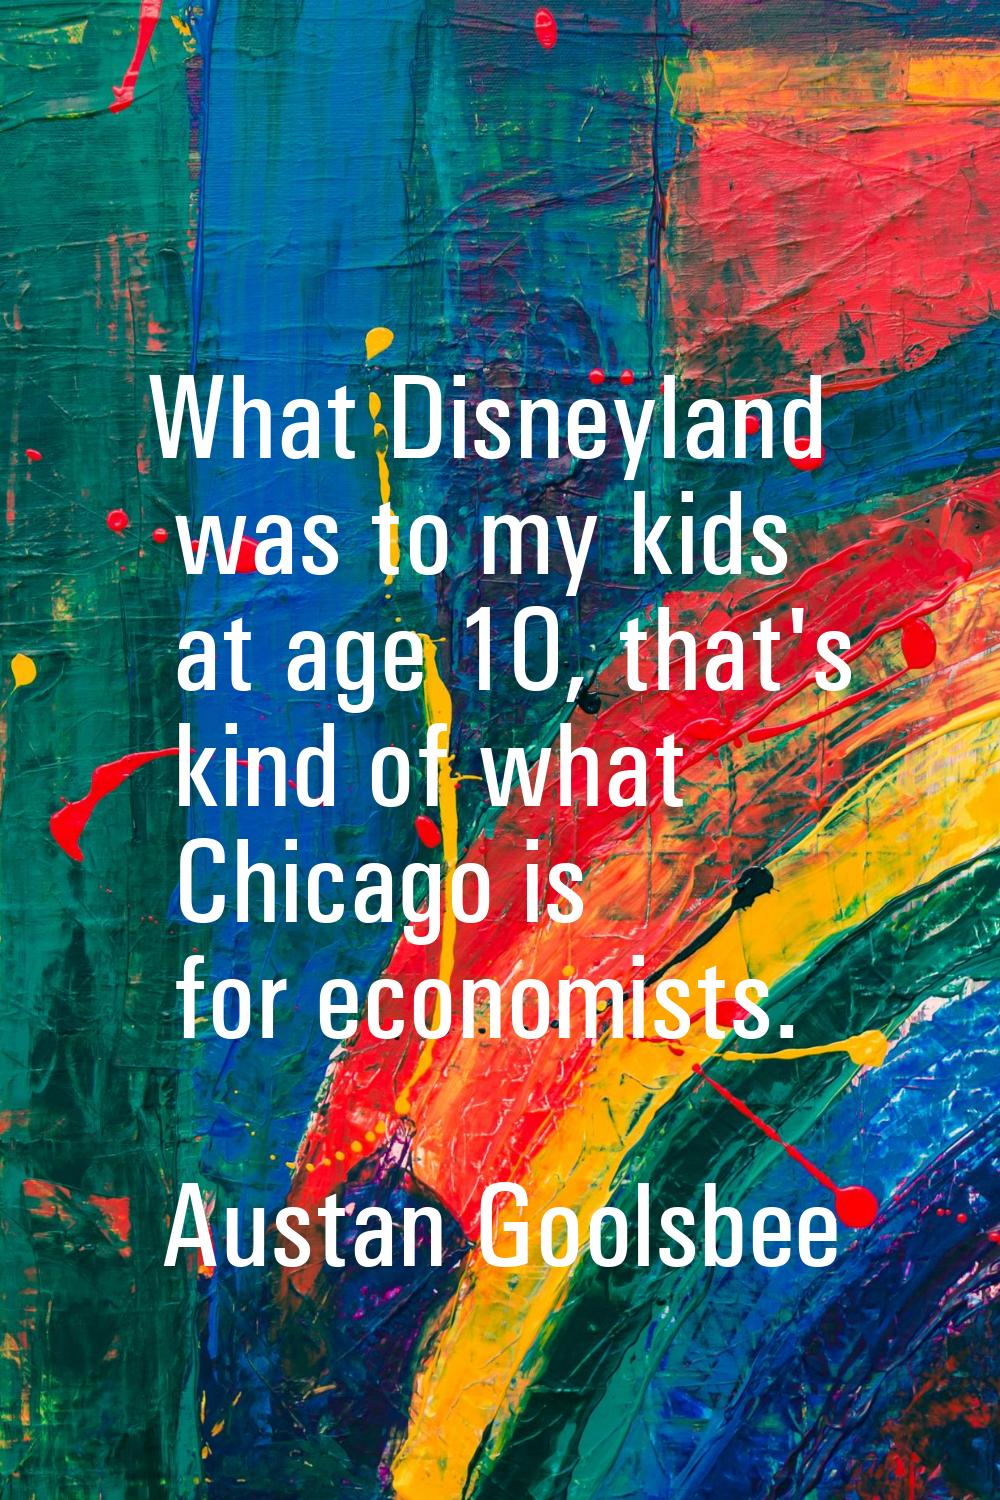 What Disneyland was to my kids at age 10, that's kind of what Chicago is for economists.